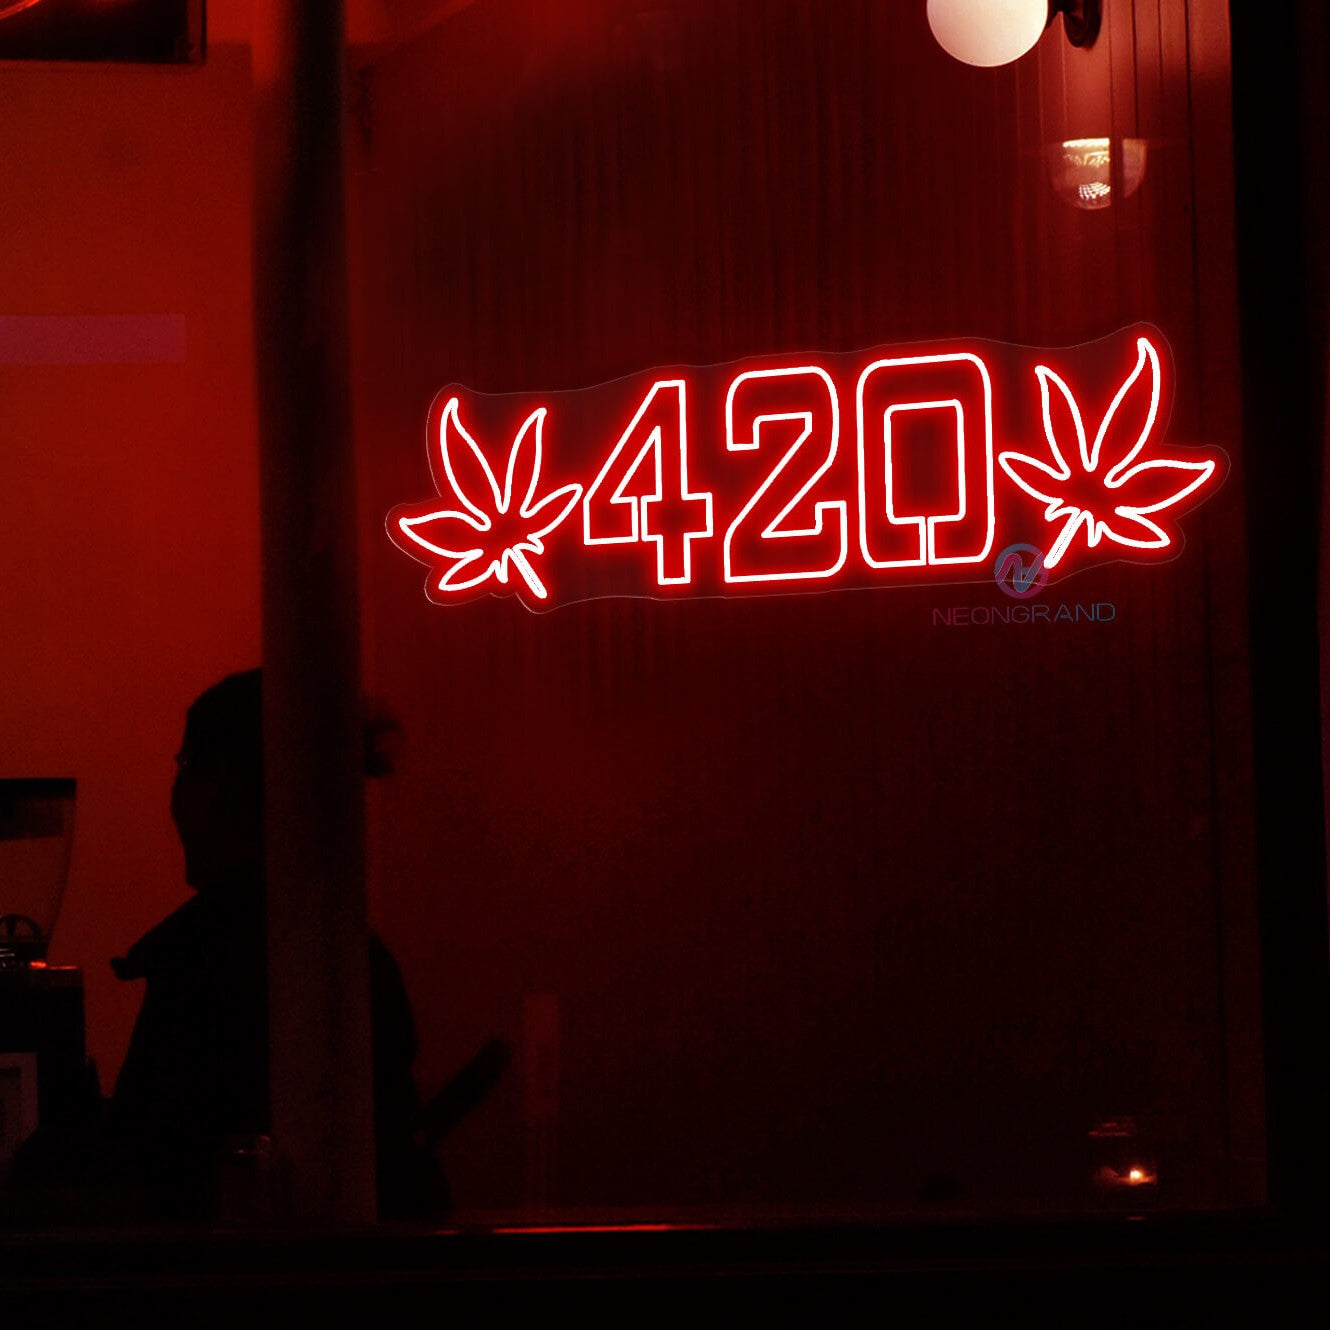 420 Neon Sign Cannabis Leaf Weed Led Light